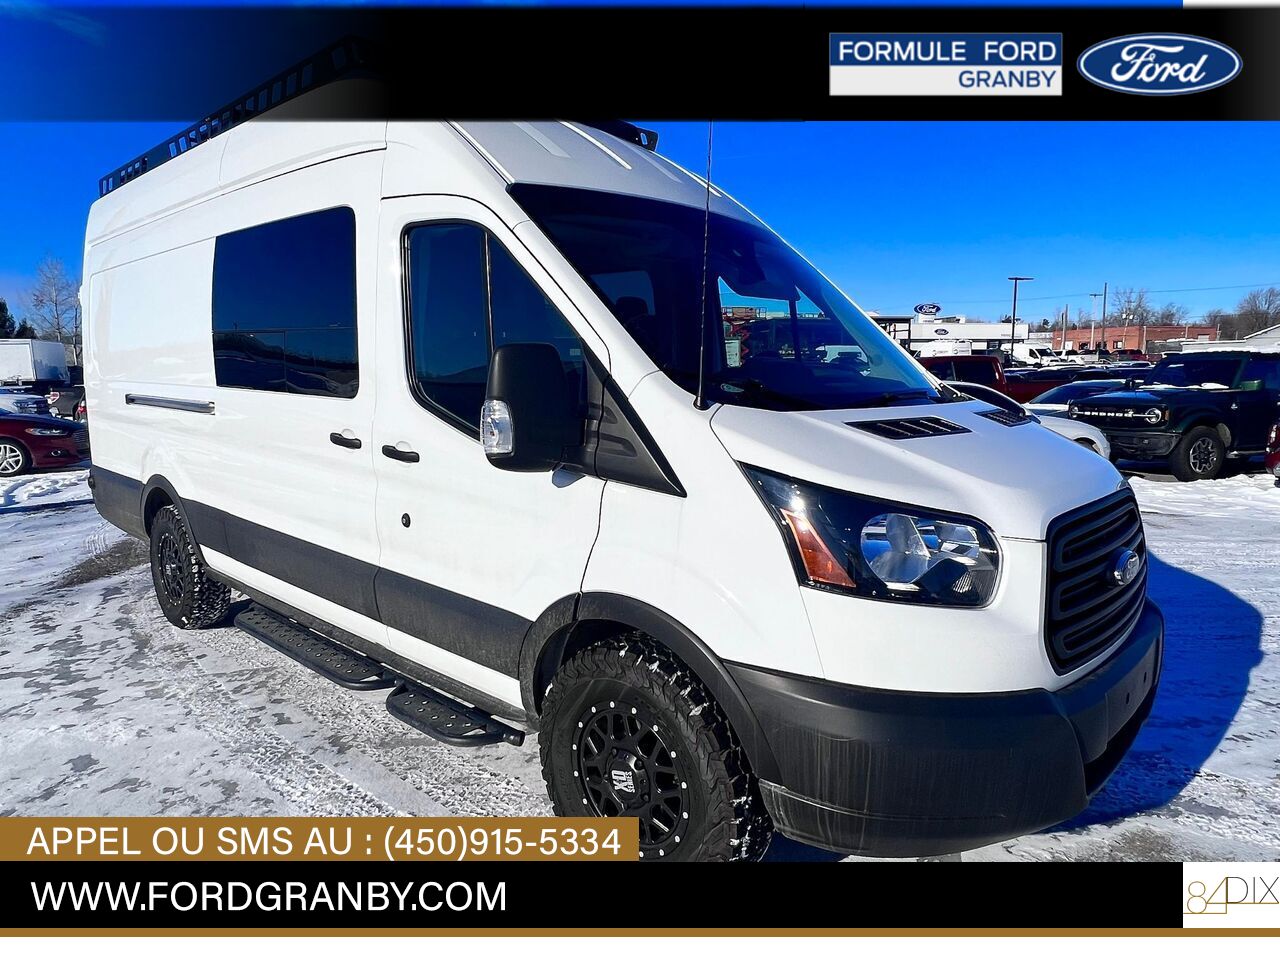 Ford Transit fourgon utilitaire 2019 Granby - photo #0